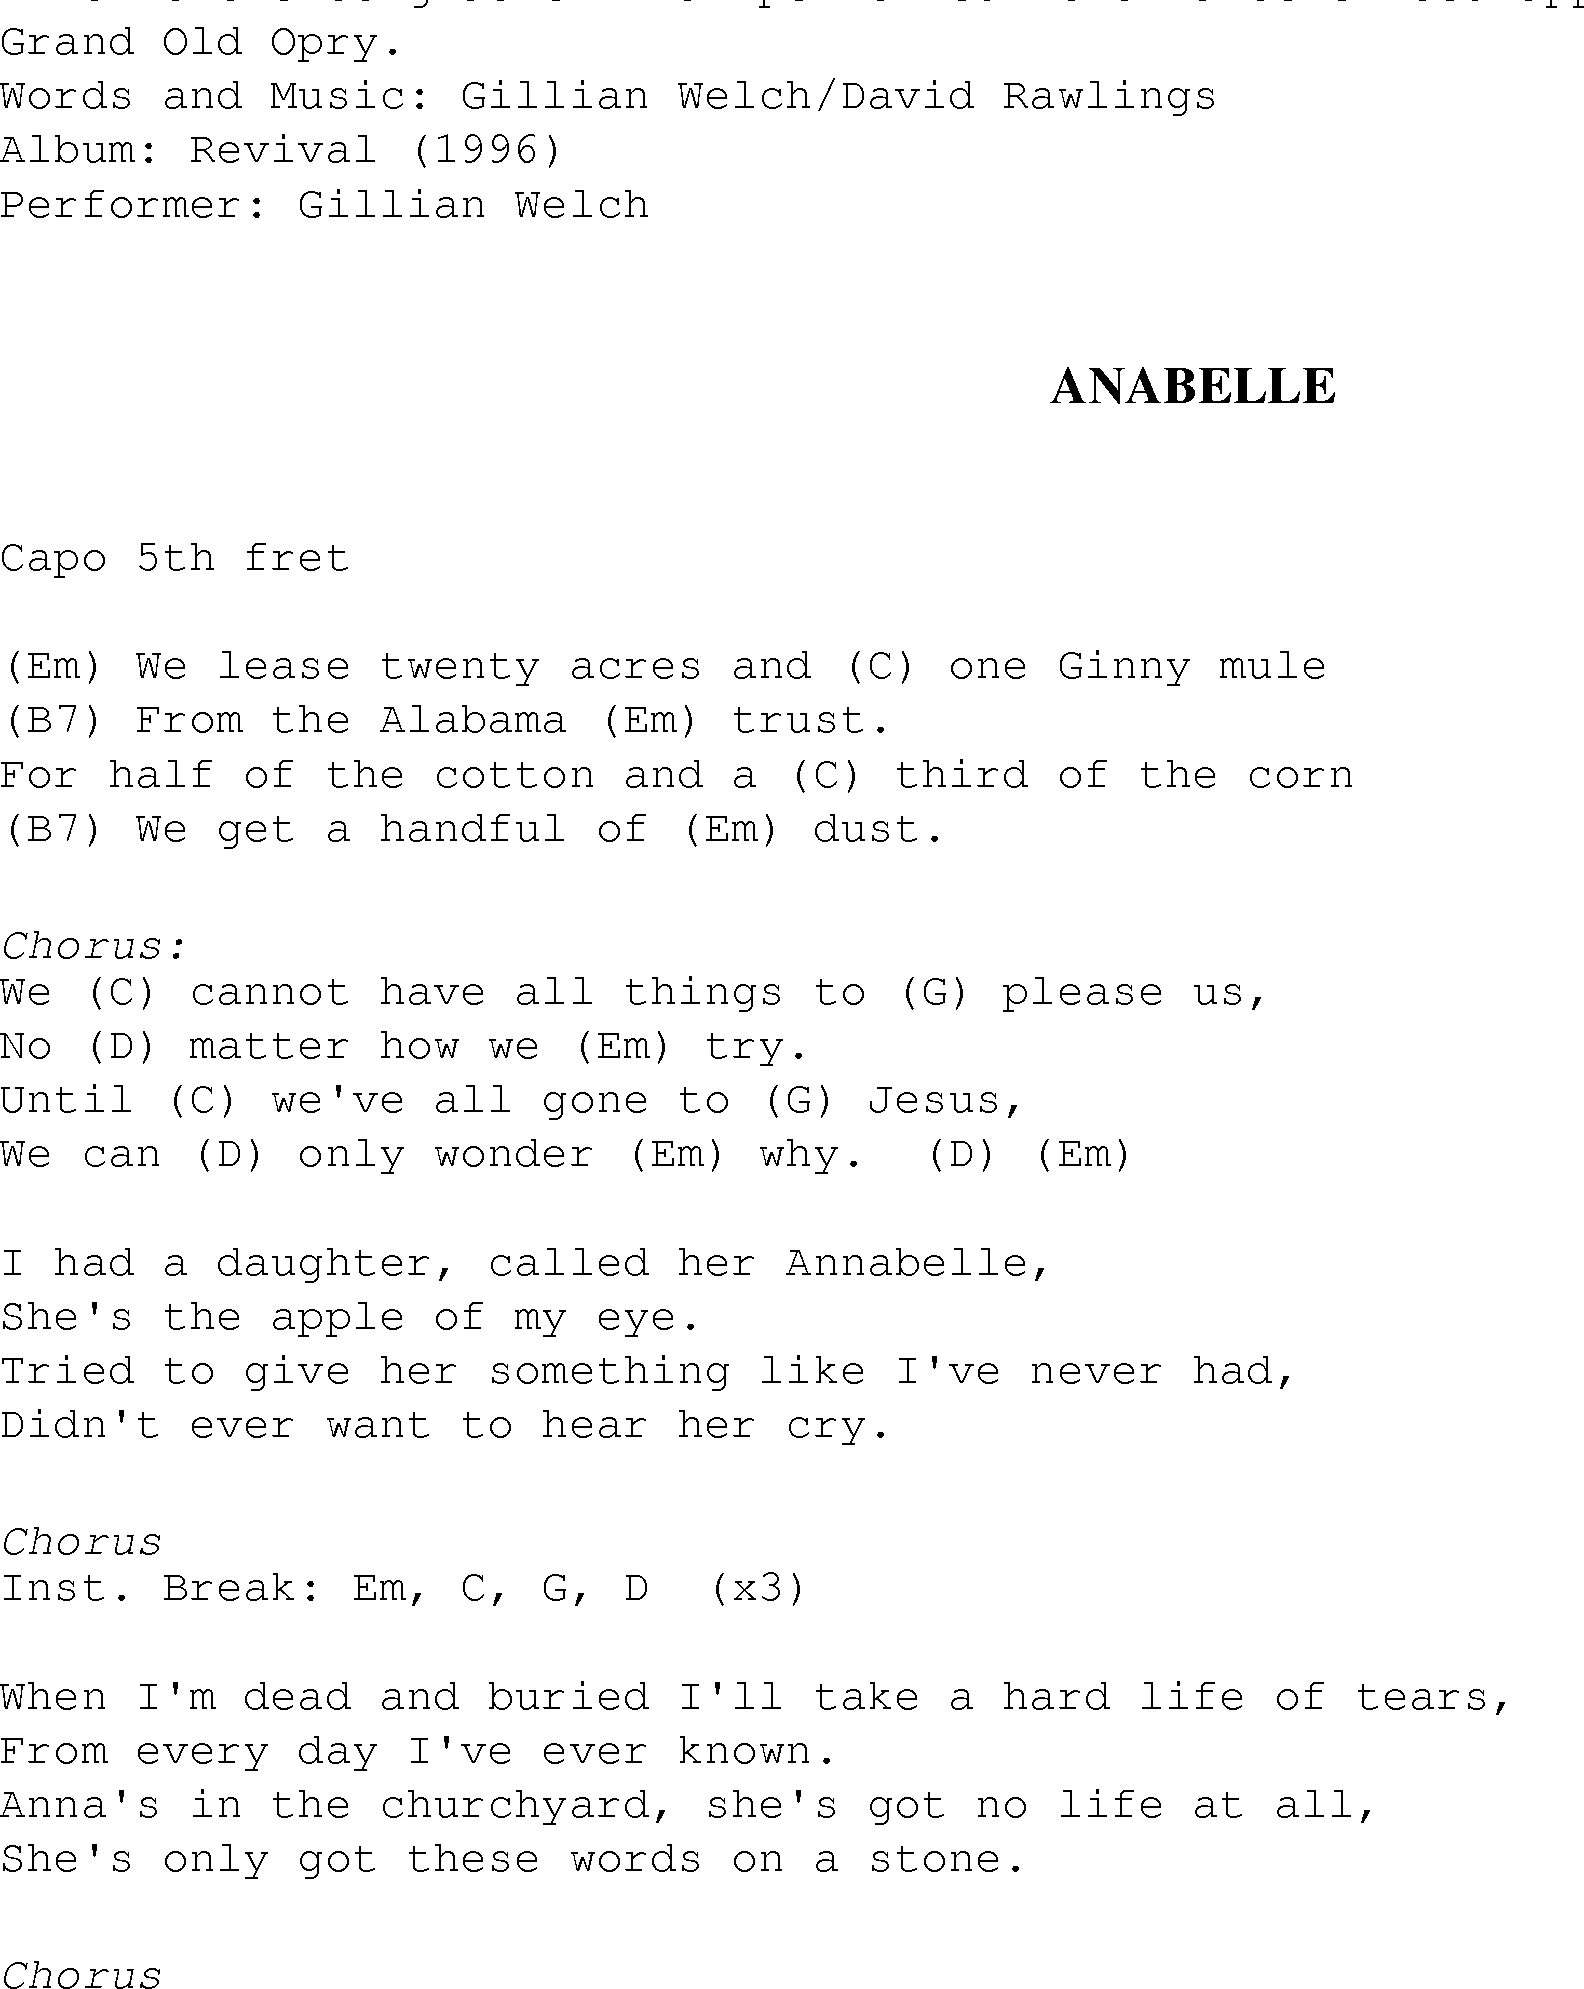 Gospel Song: anabelle, lyrics and chords.